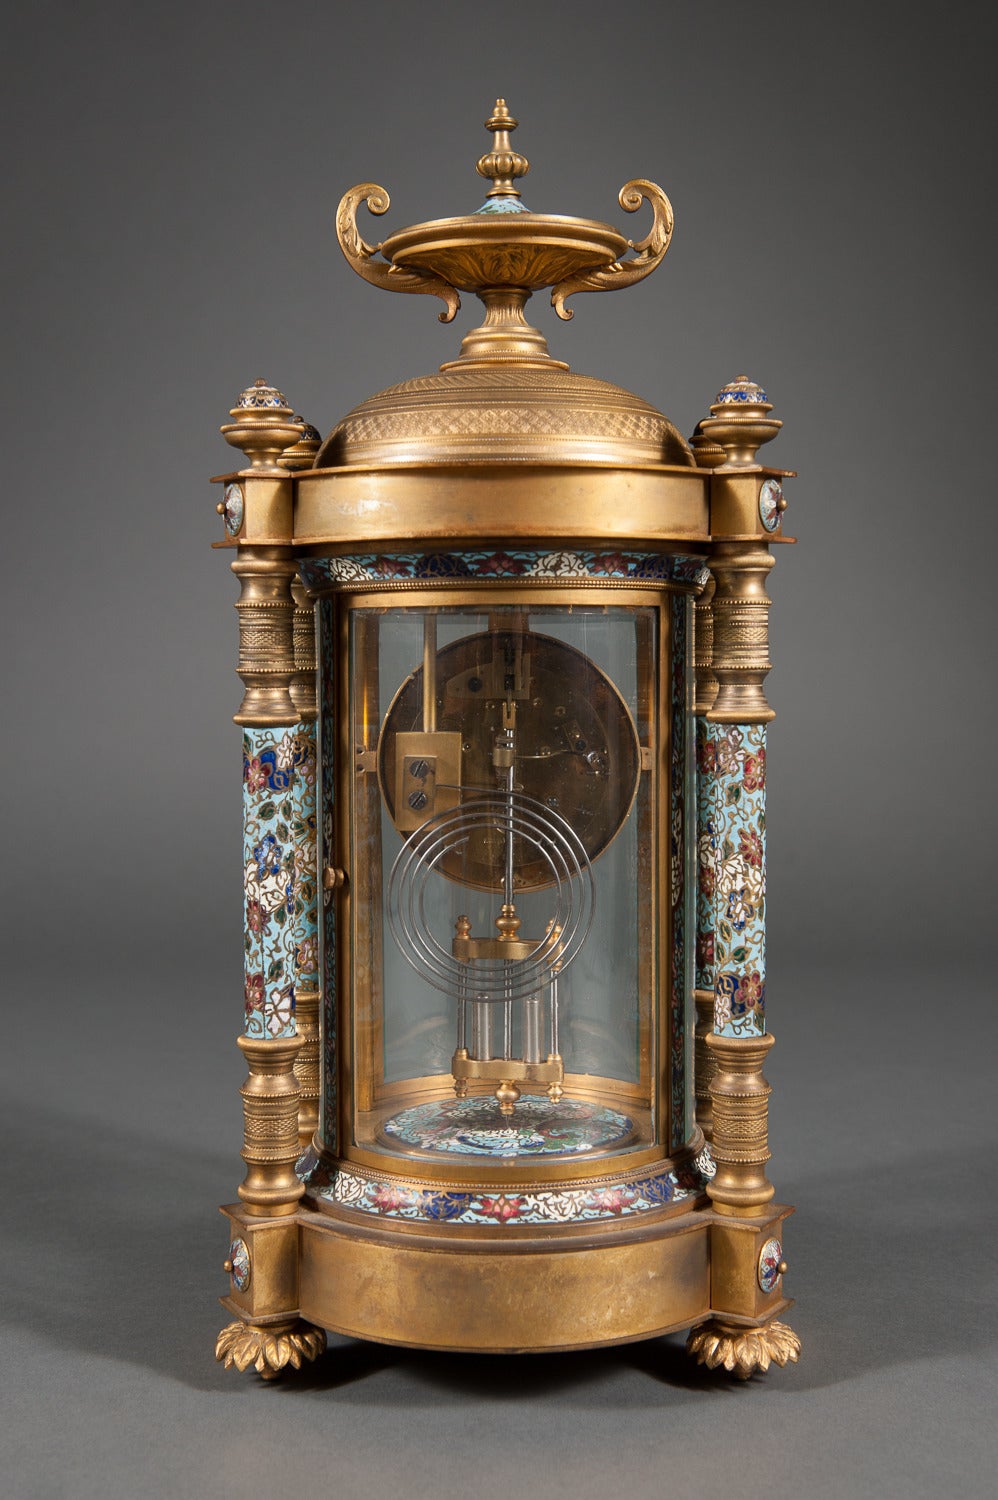 French Champleve Enamel and Gilt Bronze Four Glass Regulator Clock by Hour Lavigne